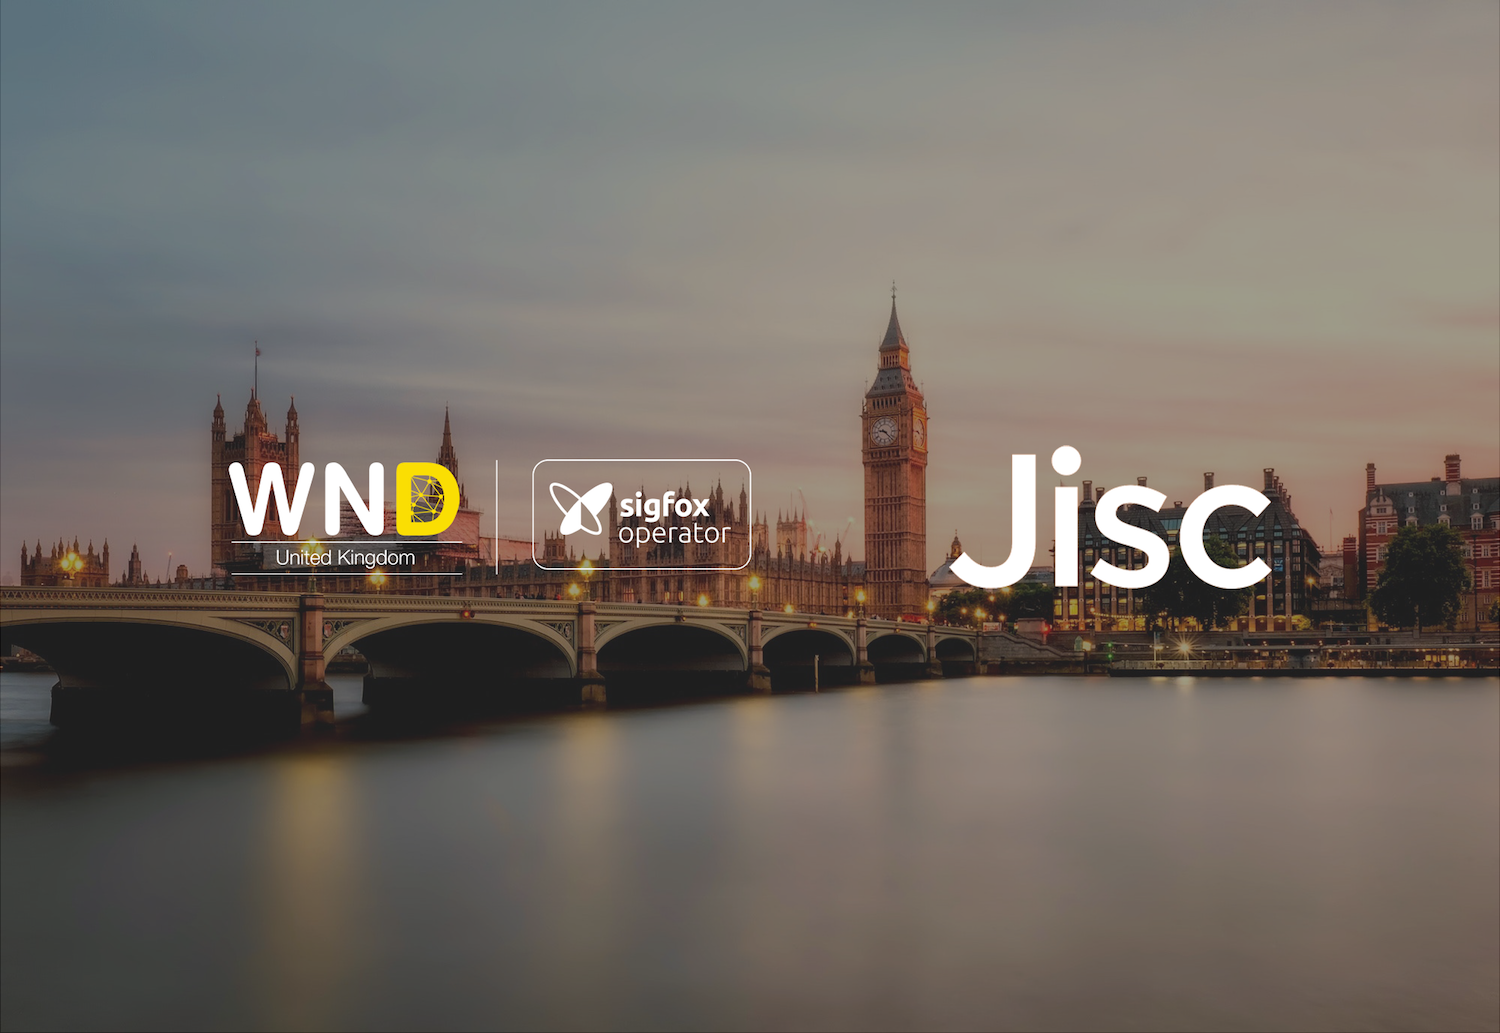 #Jisc and @Sigfox seek partners to show how connecting small things makes a big difference